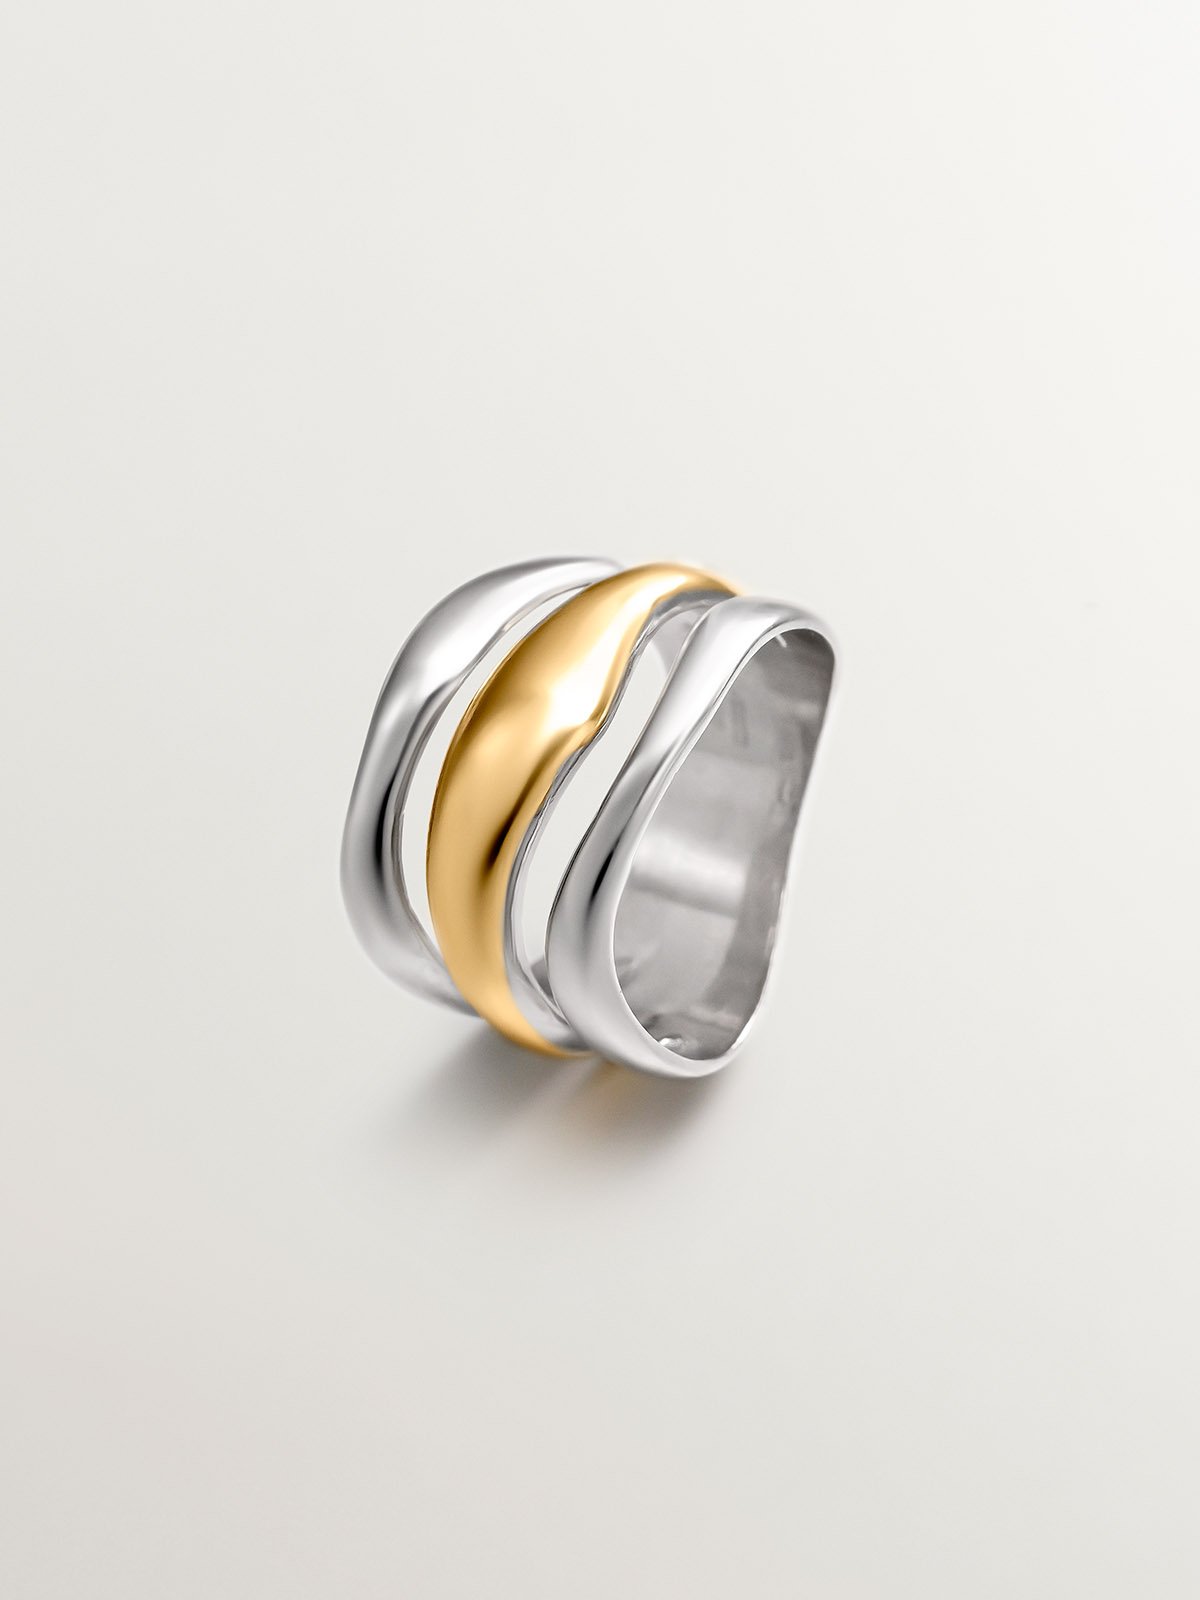 Bicolor triple ring made of 925 silver and 925 silver bathed in 18K yellow gold.